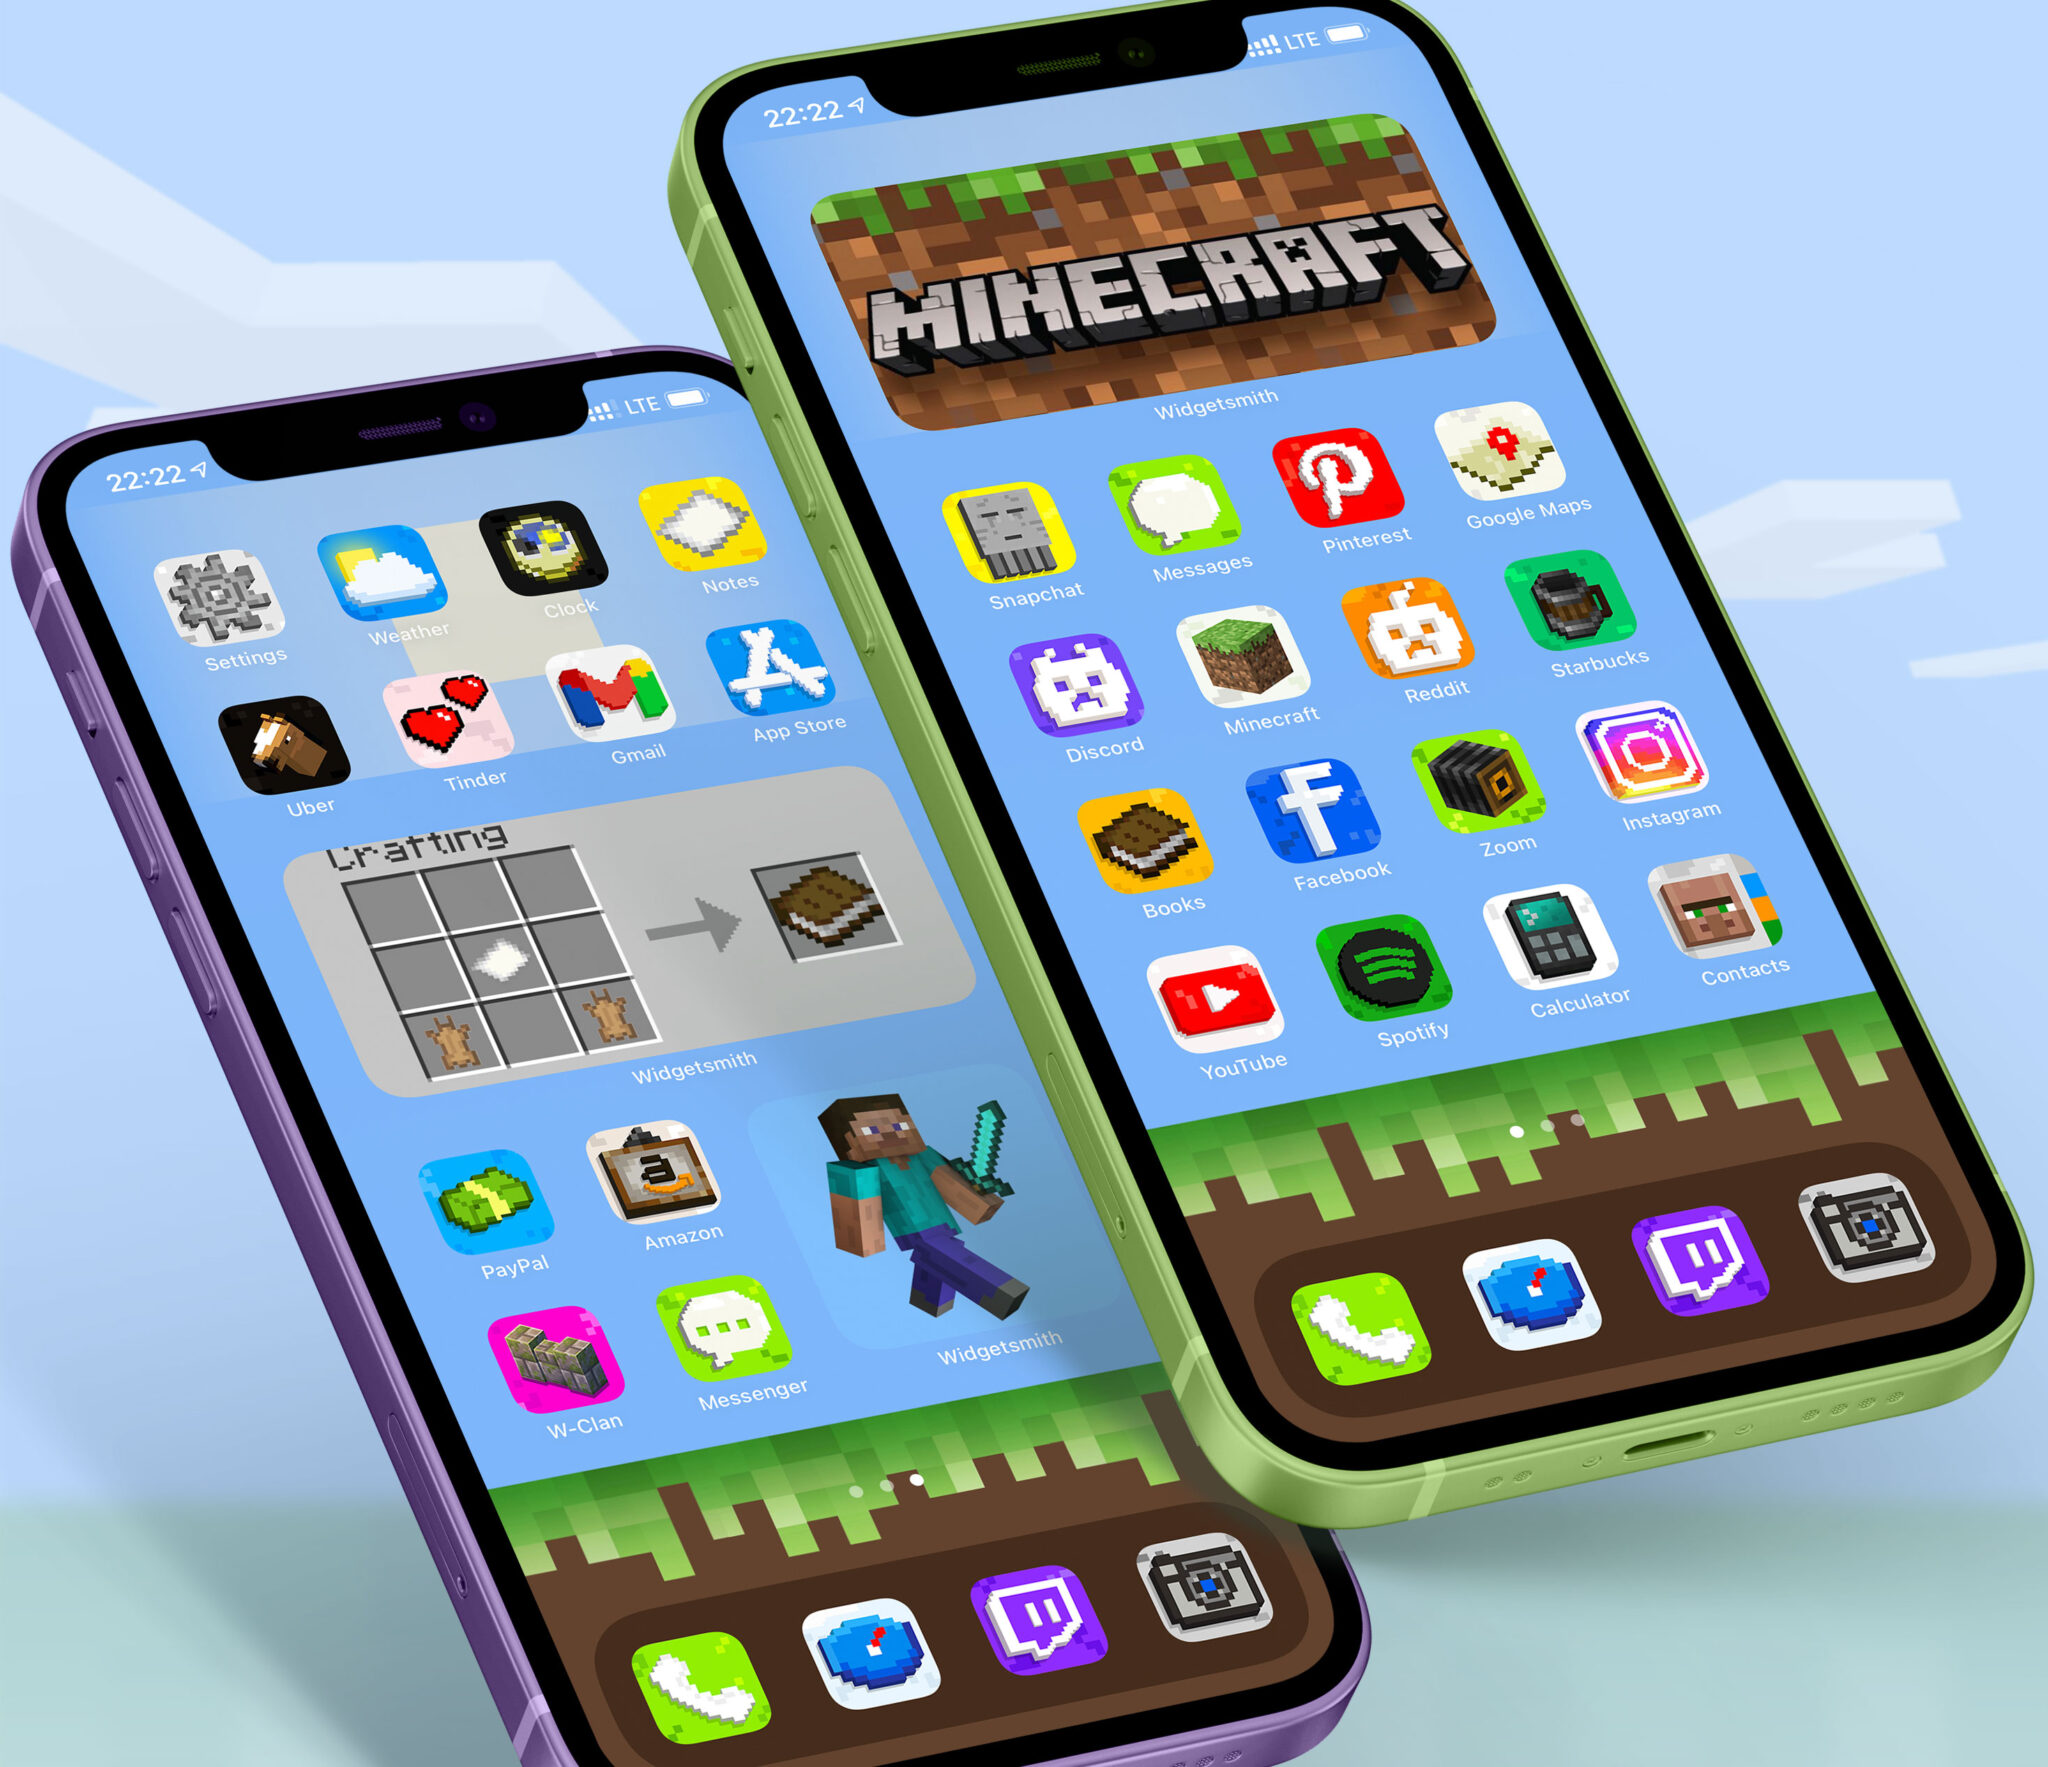 Minecraft App Icons - Free Aesthetic App Icons for iOS 14 & Android ⛏📲